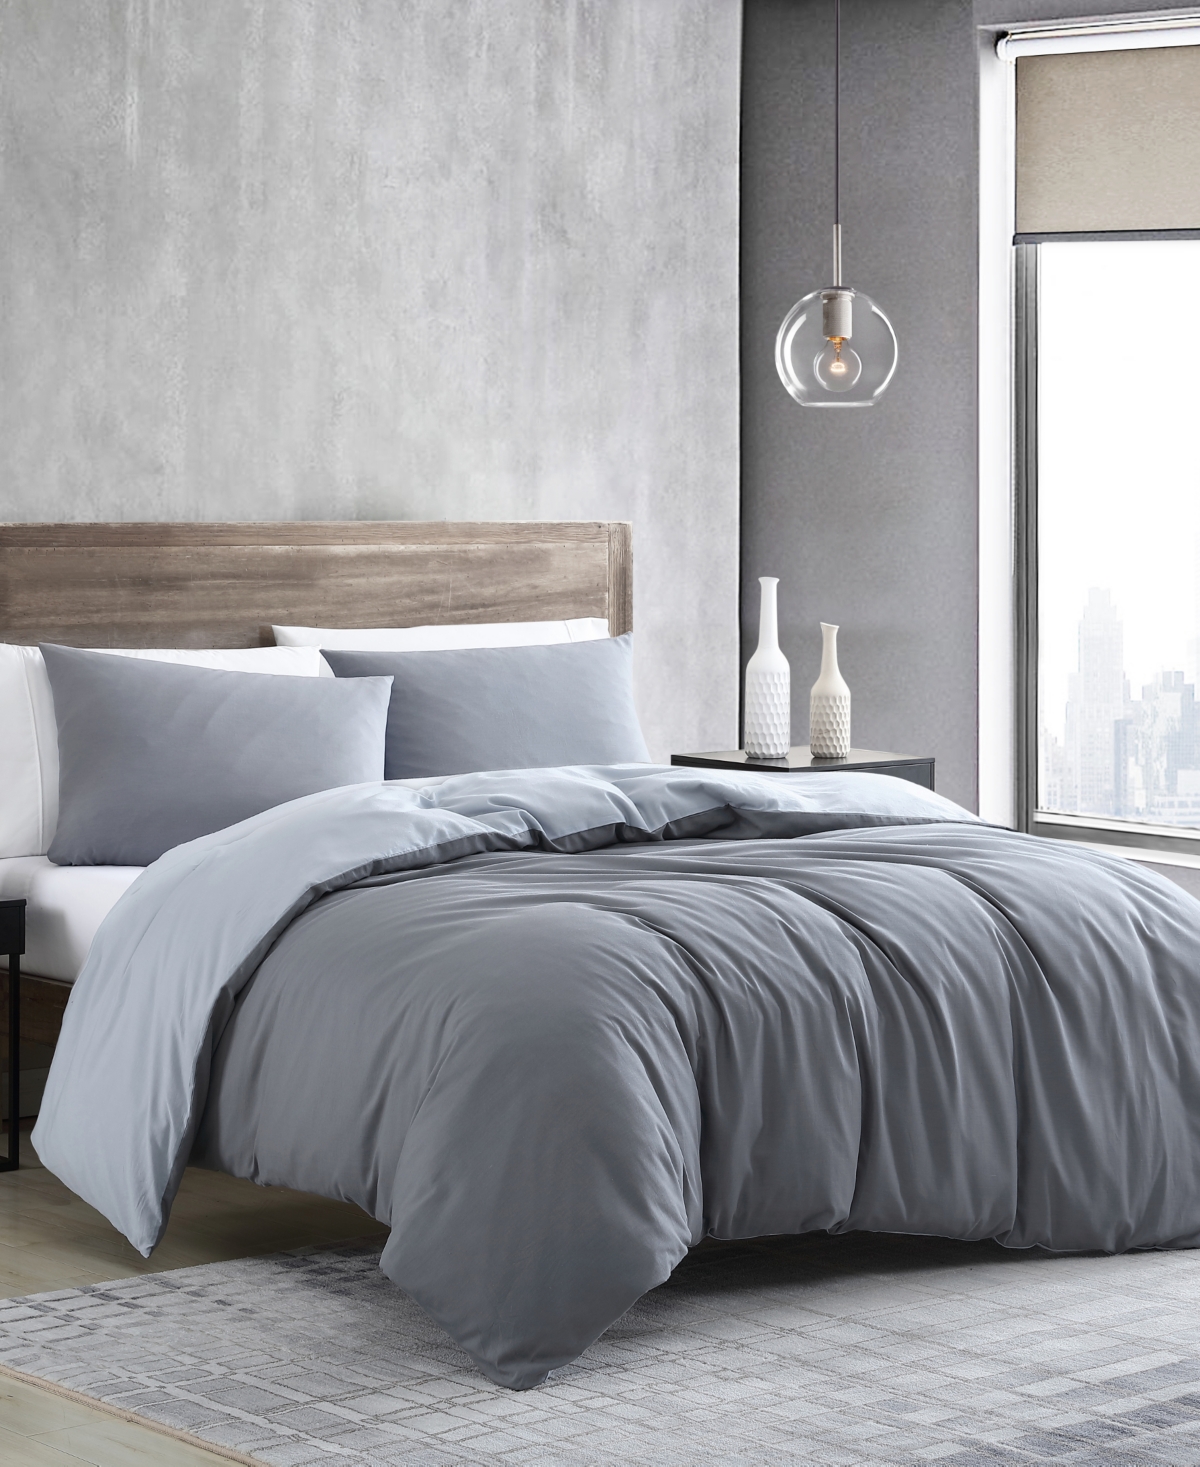 KENNETH COLE NEW YORK CLOSEOUT! KENNETH COLE NEW YORK MIRO SOLID EXCEL DUVET COVER SET, KING BEDDING